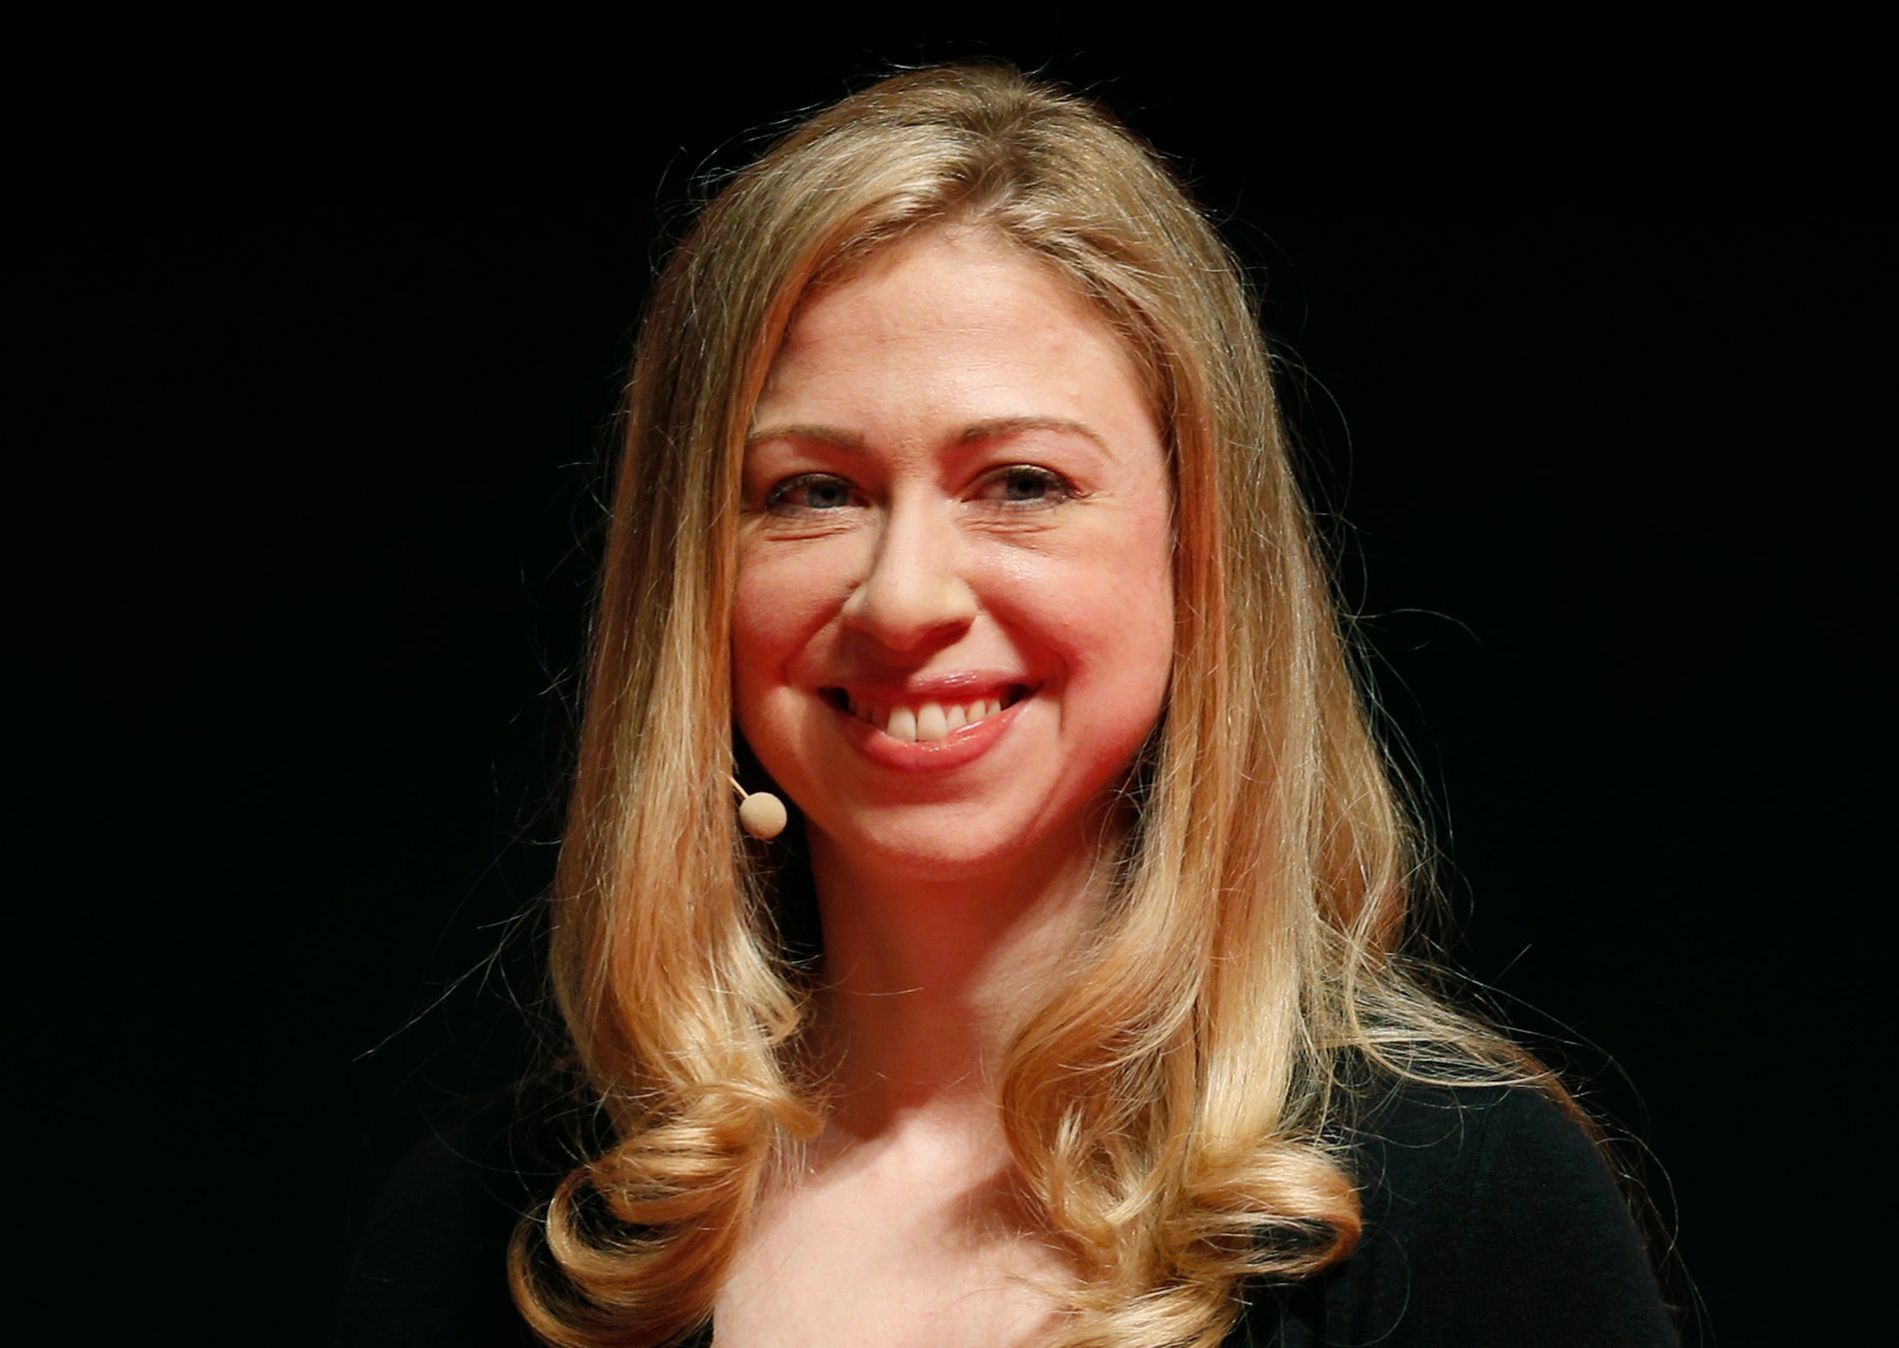 File of Chelsea Clinton, a board member of the Clinton Foundation, smiles during Women Deliver 2013 in Kuala Lumpur